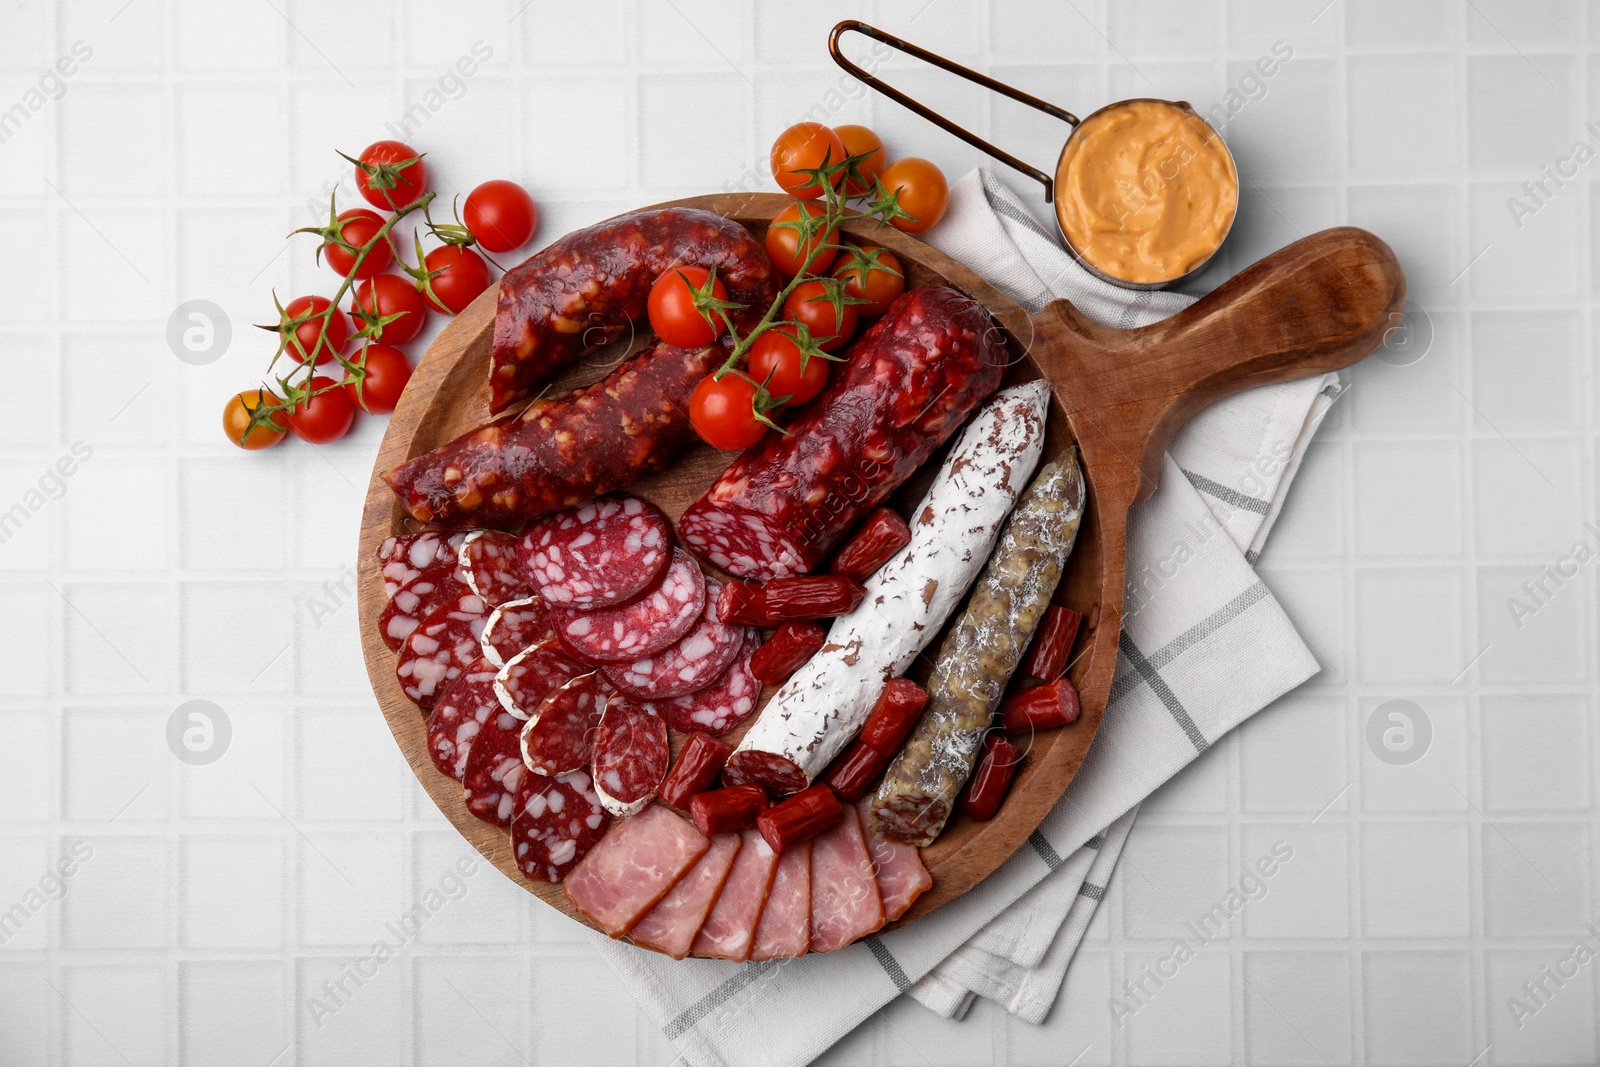 Photo of Different types of delicious sausages, sauce and tomatoes on white tiled table, flat lay